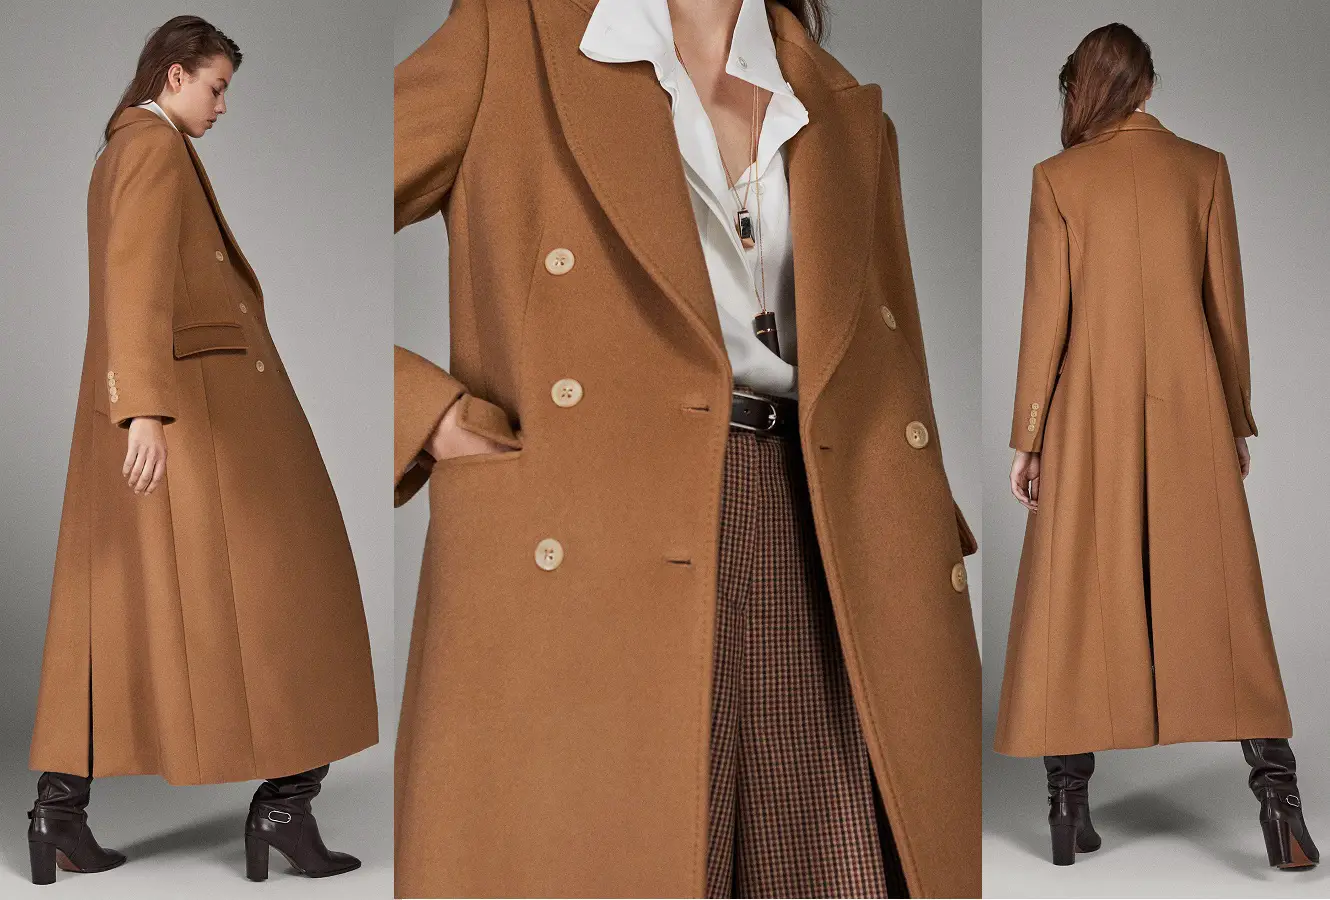 The Duchess of Cambridge wore Massimo Dutti Limited Edition Button Cashmere Wool Camel Coat